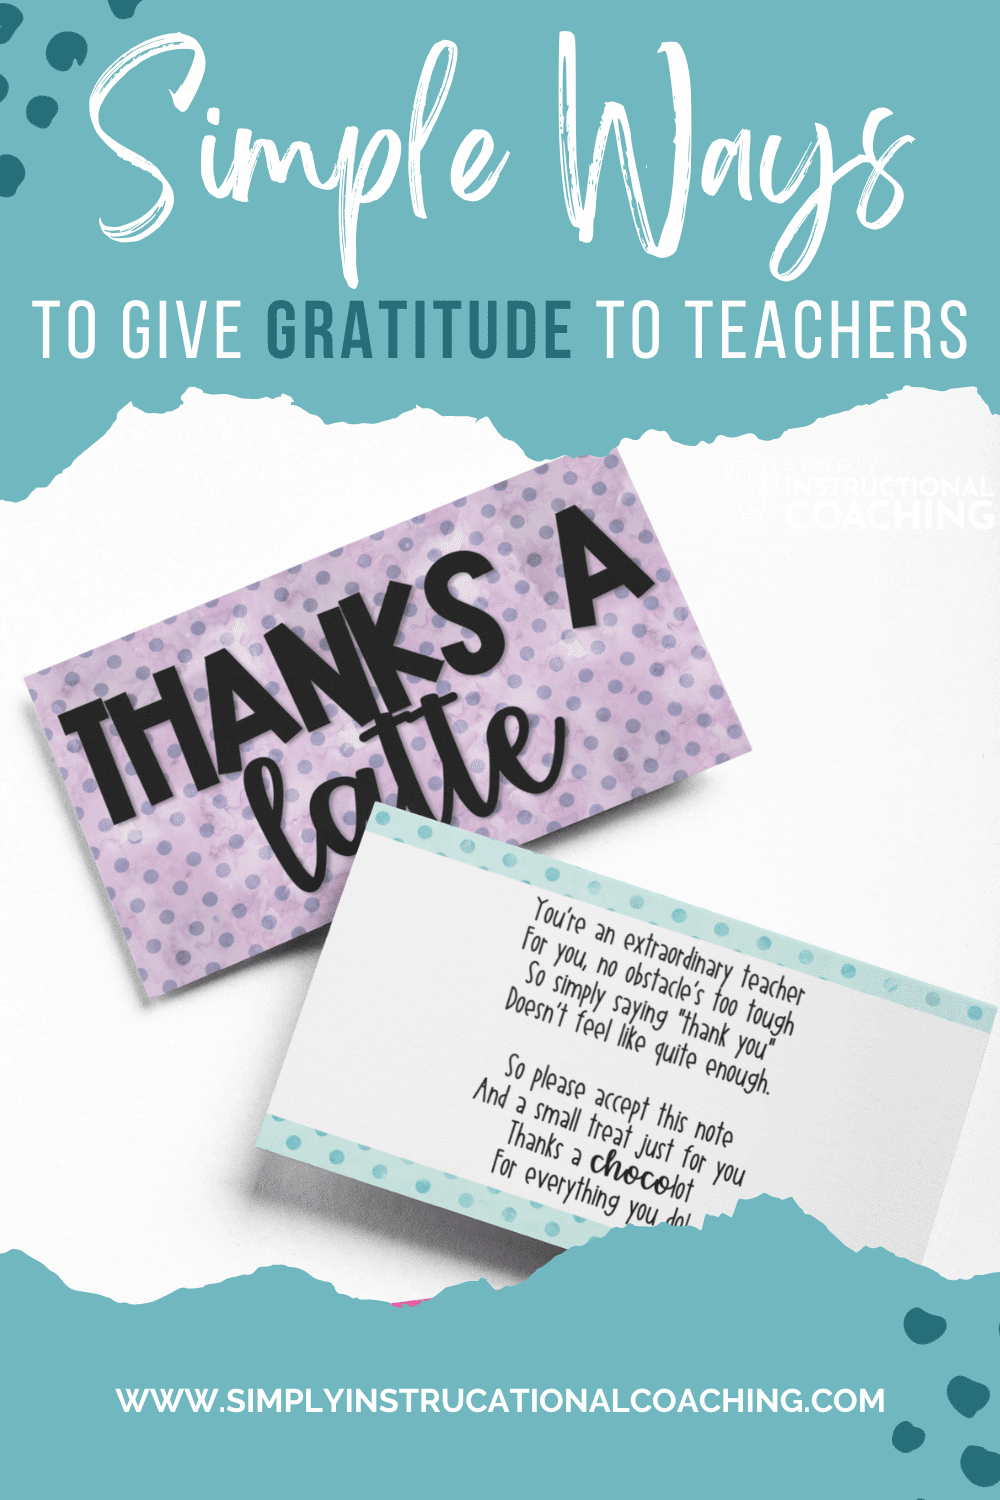 Simple Ways to give gratitude to teachers as an instructional coach